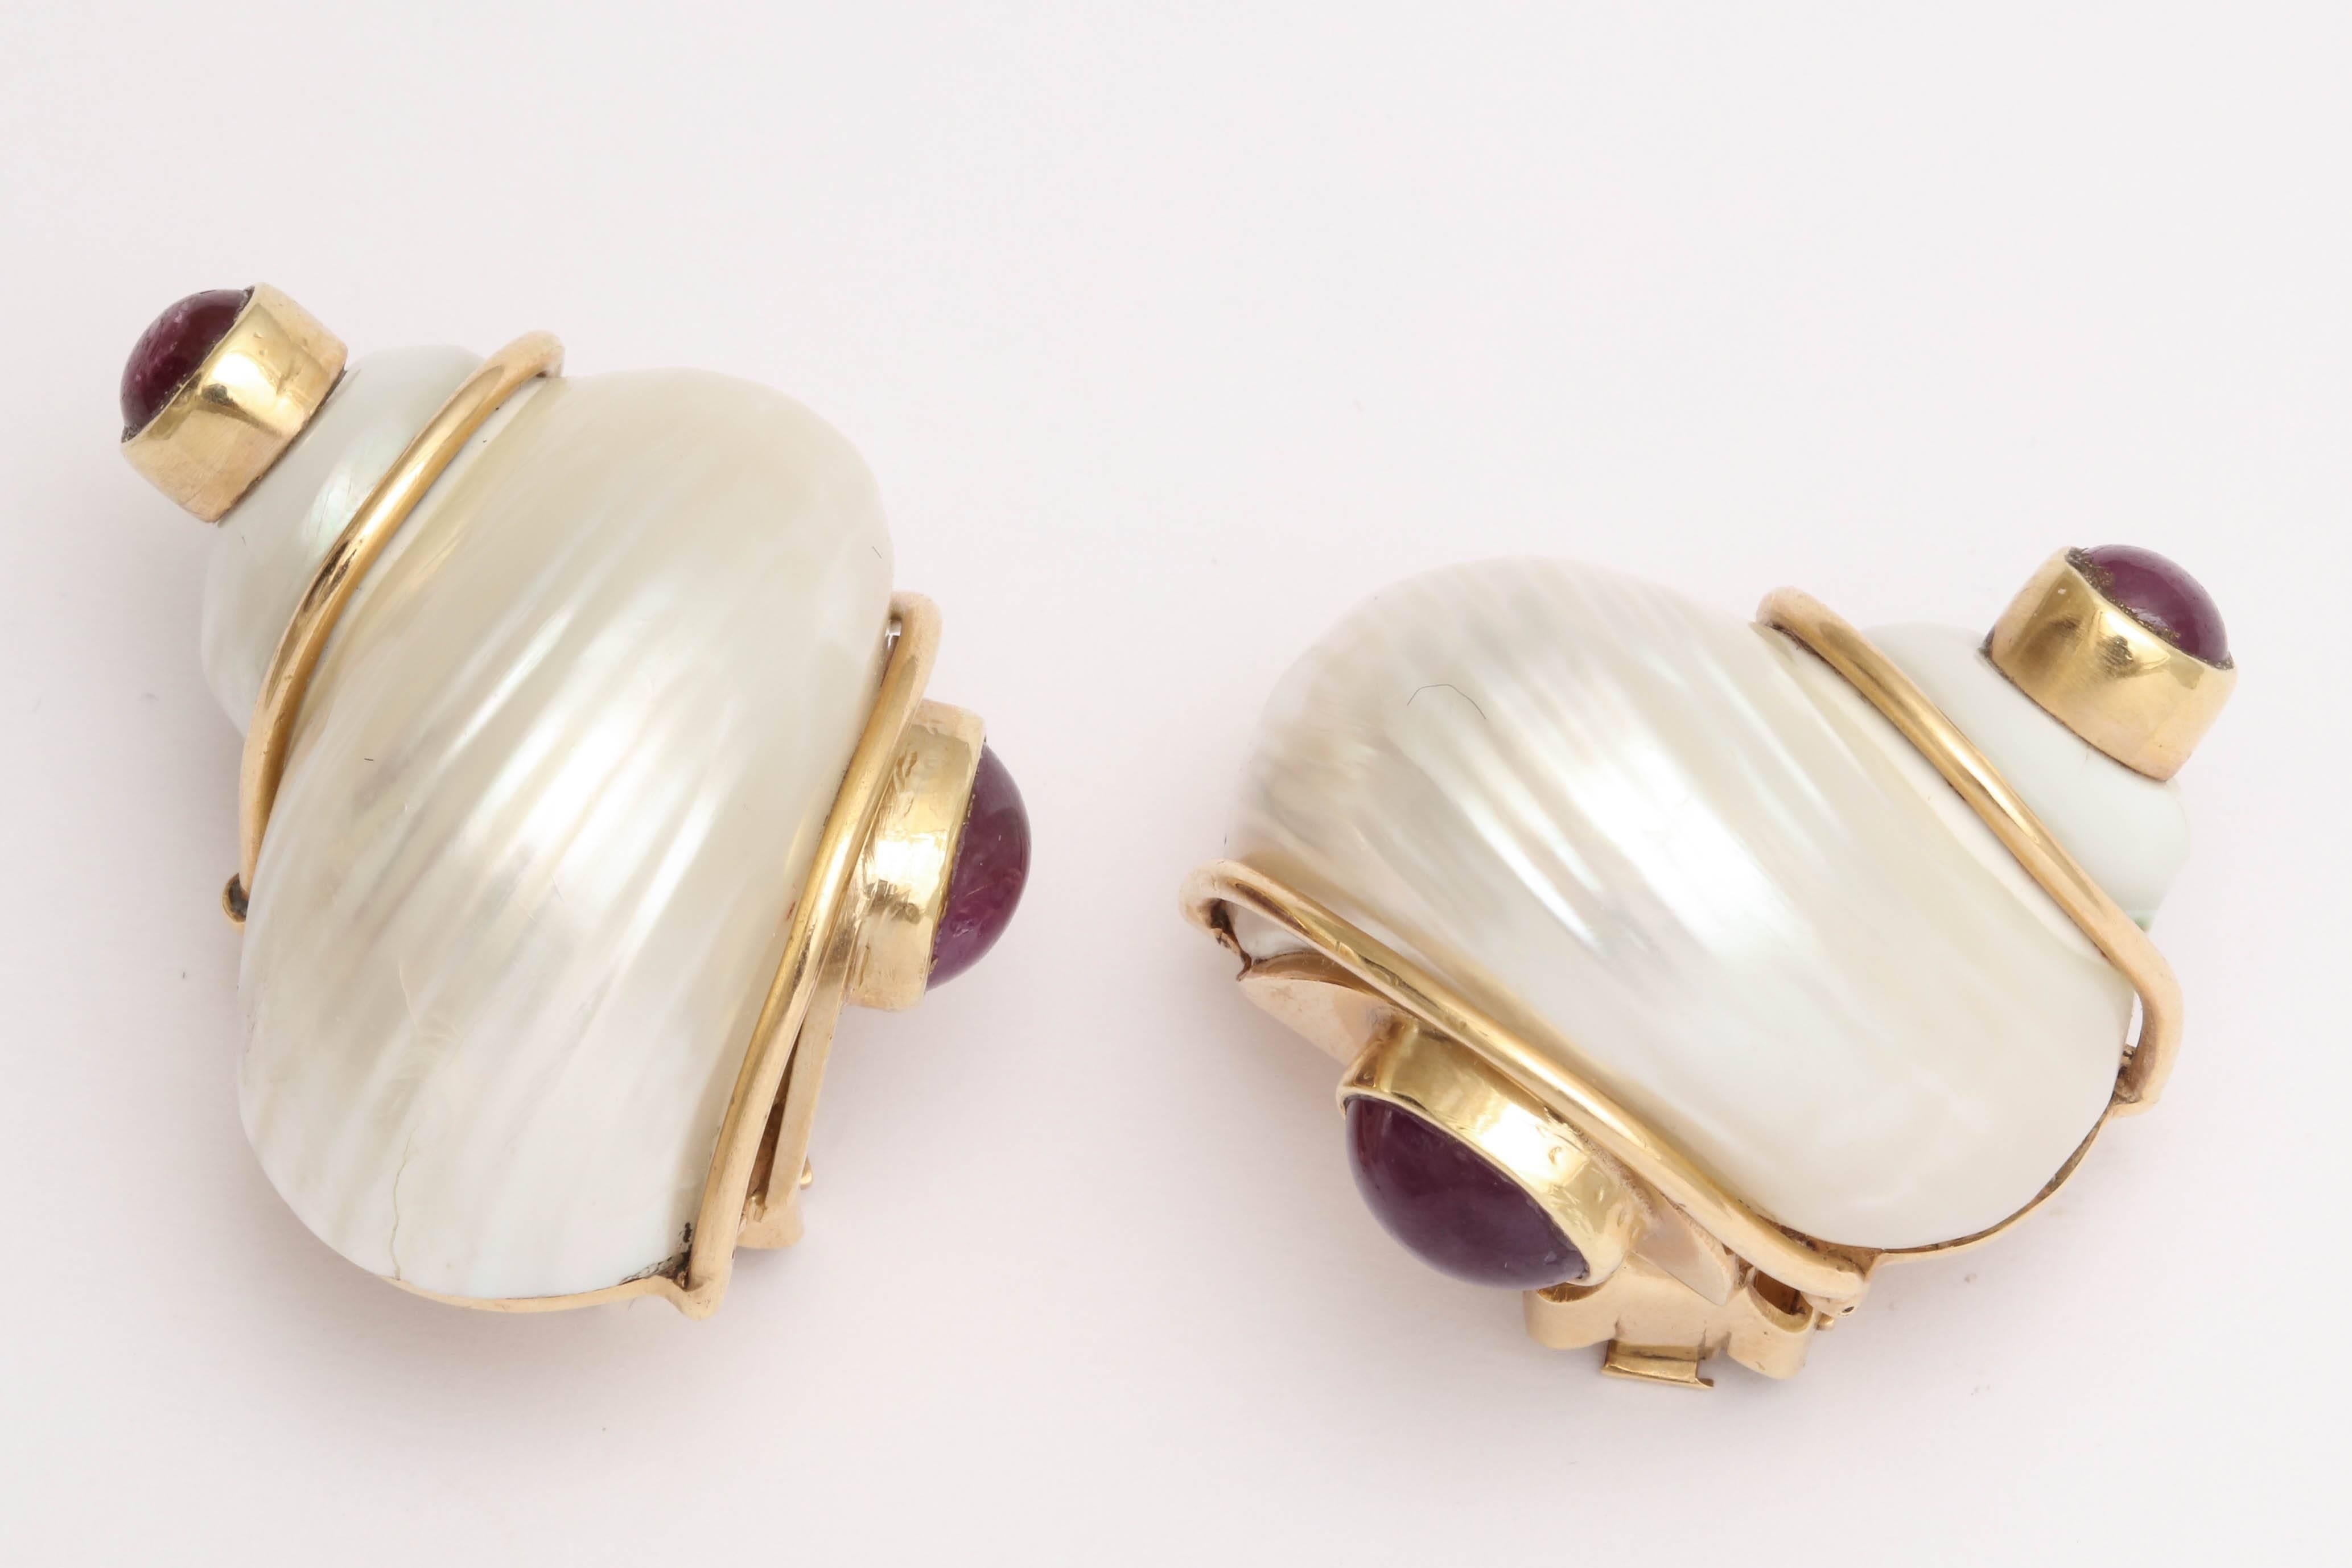 One Pair Of Ladies Large Size Turbo Shell Earclips Designed By Seaman Schepps Created In 14kt Yellow Gold And Made In The 1940's. Further Flanked With Four 10mm Cabochon Rubies On Both Sides Weighing Approximately 2 Carats Total Weight.NOTE: Clip On